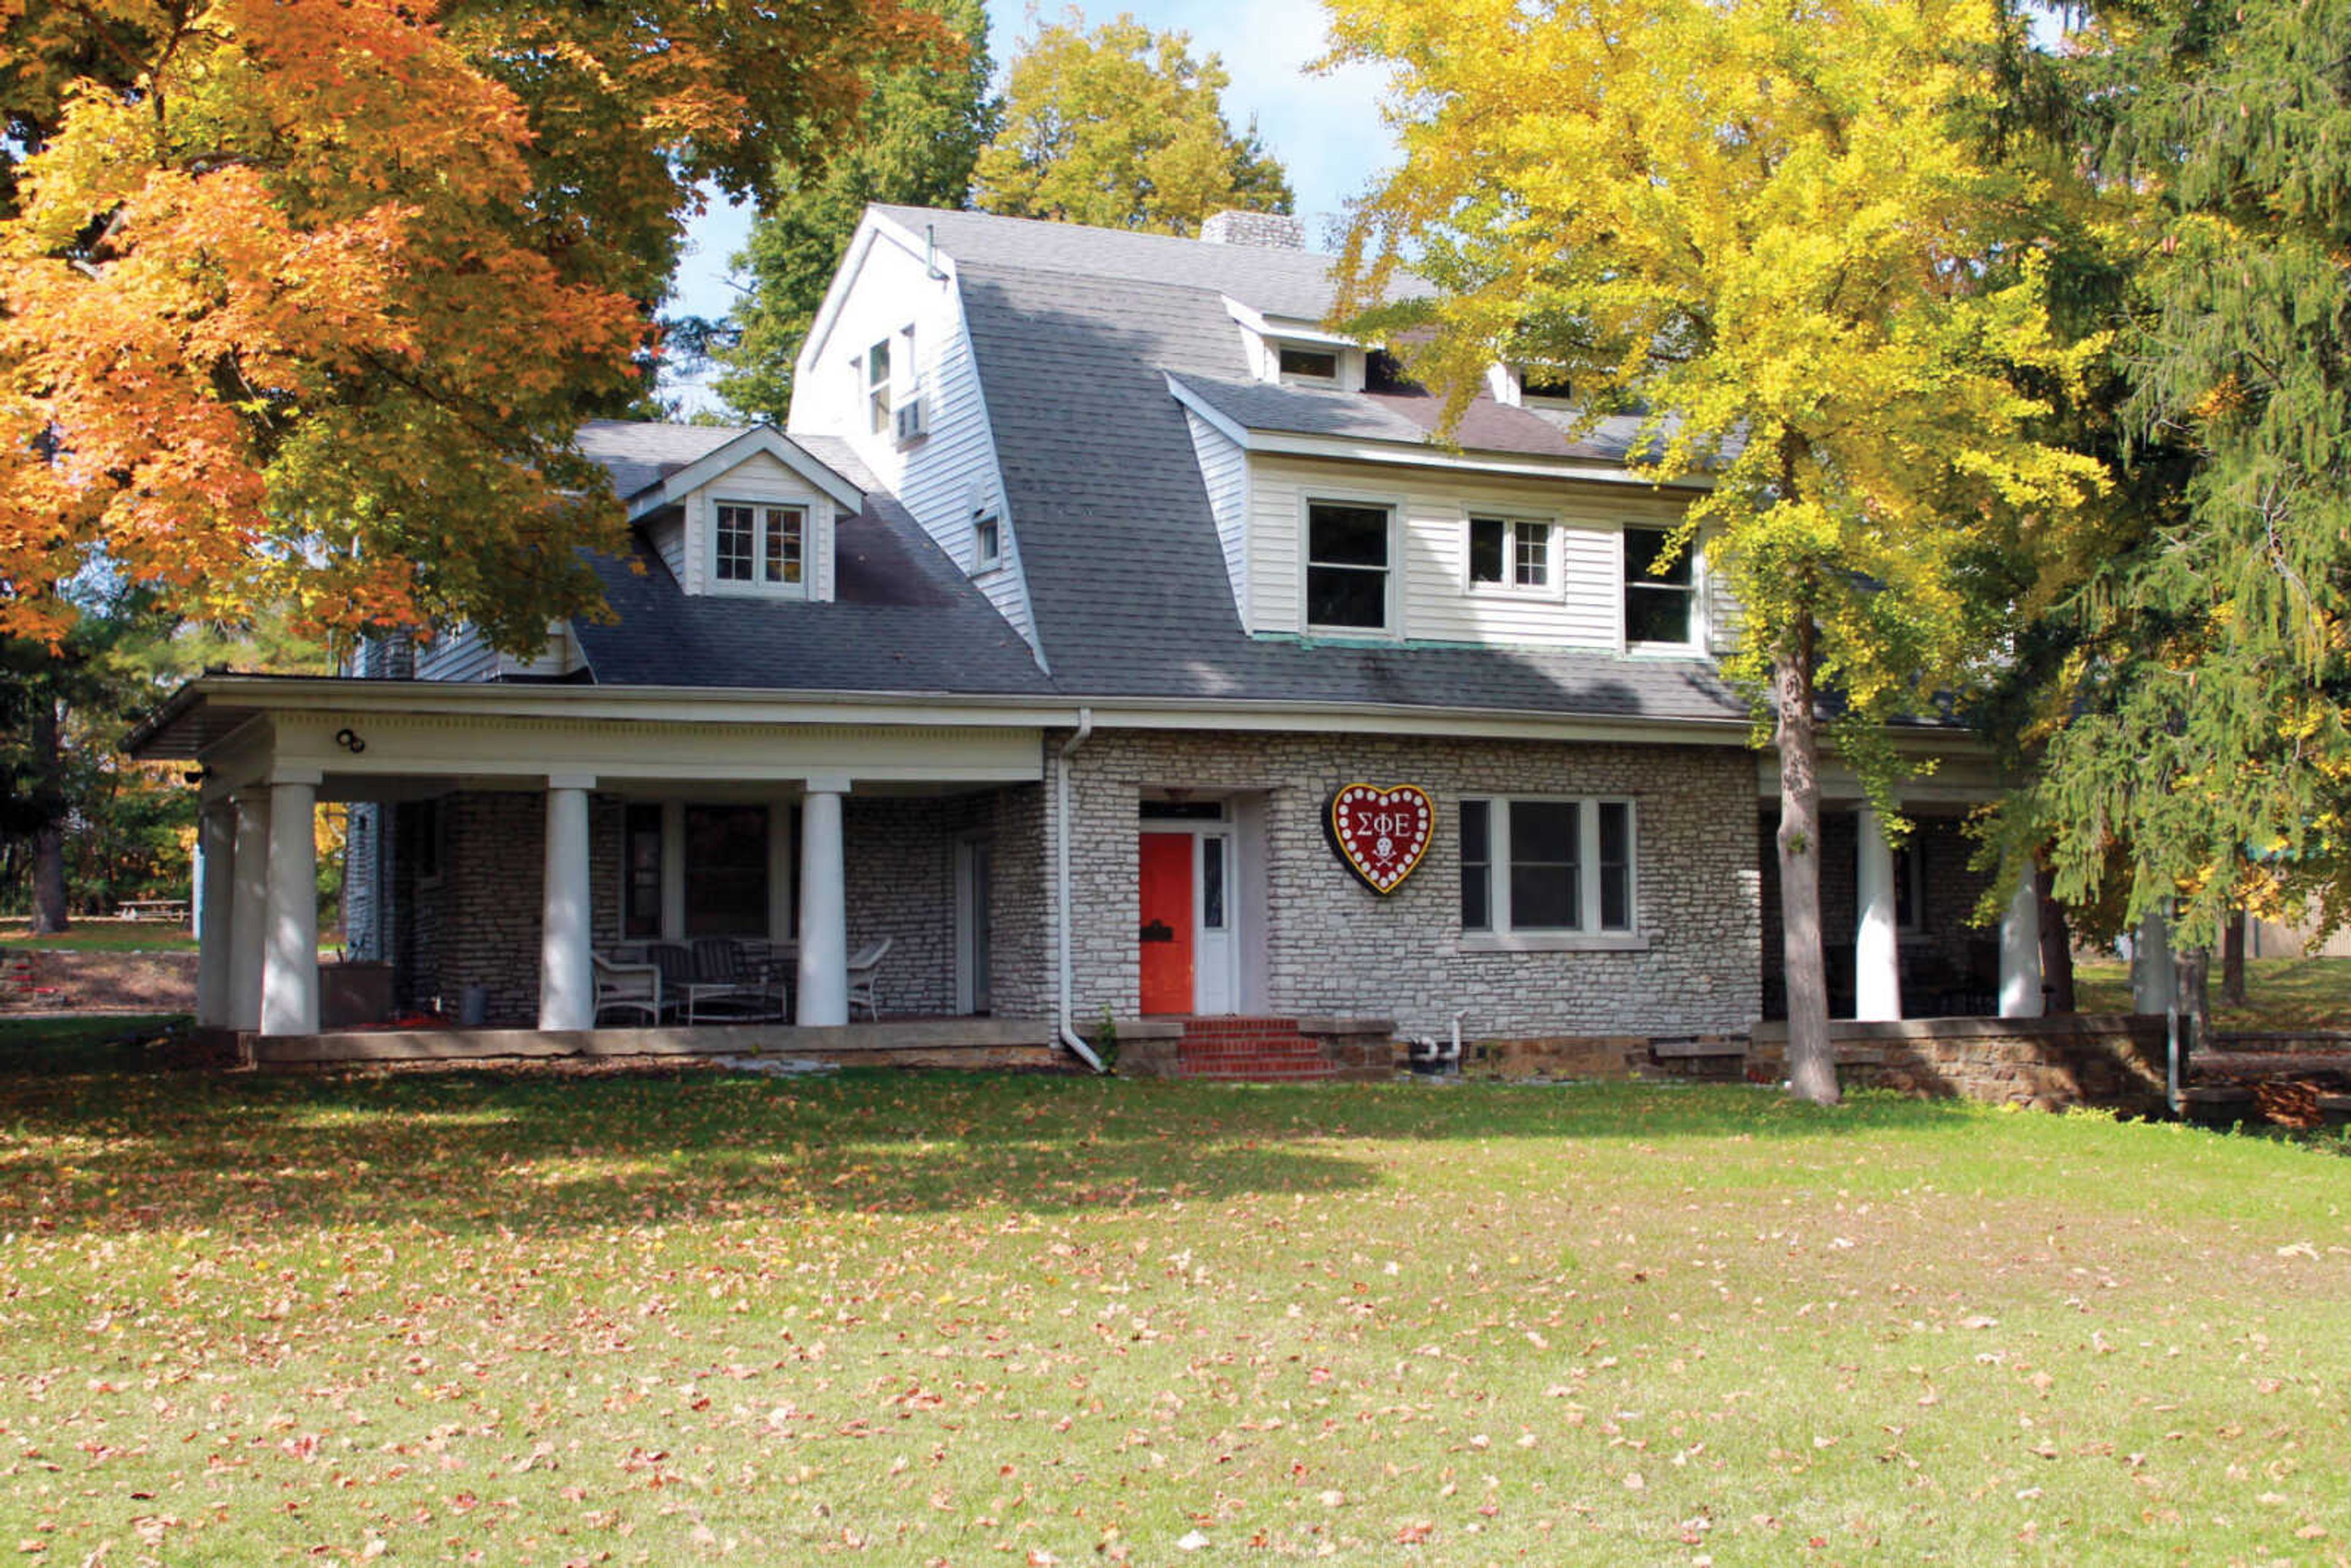 The Greystone house located next to the Show Me Center on campus is leased by Sigma Phi Epsilon from the university.